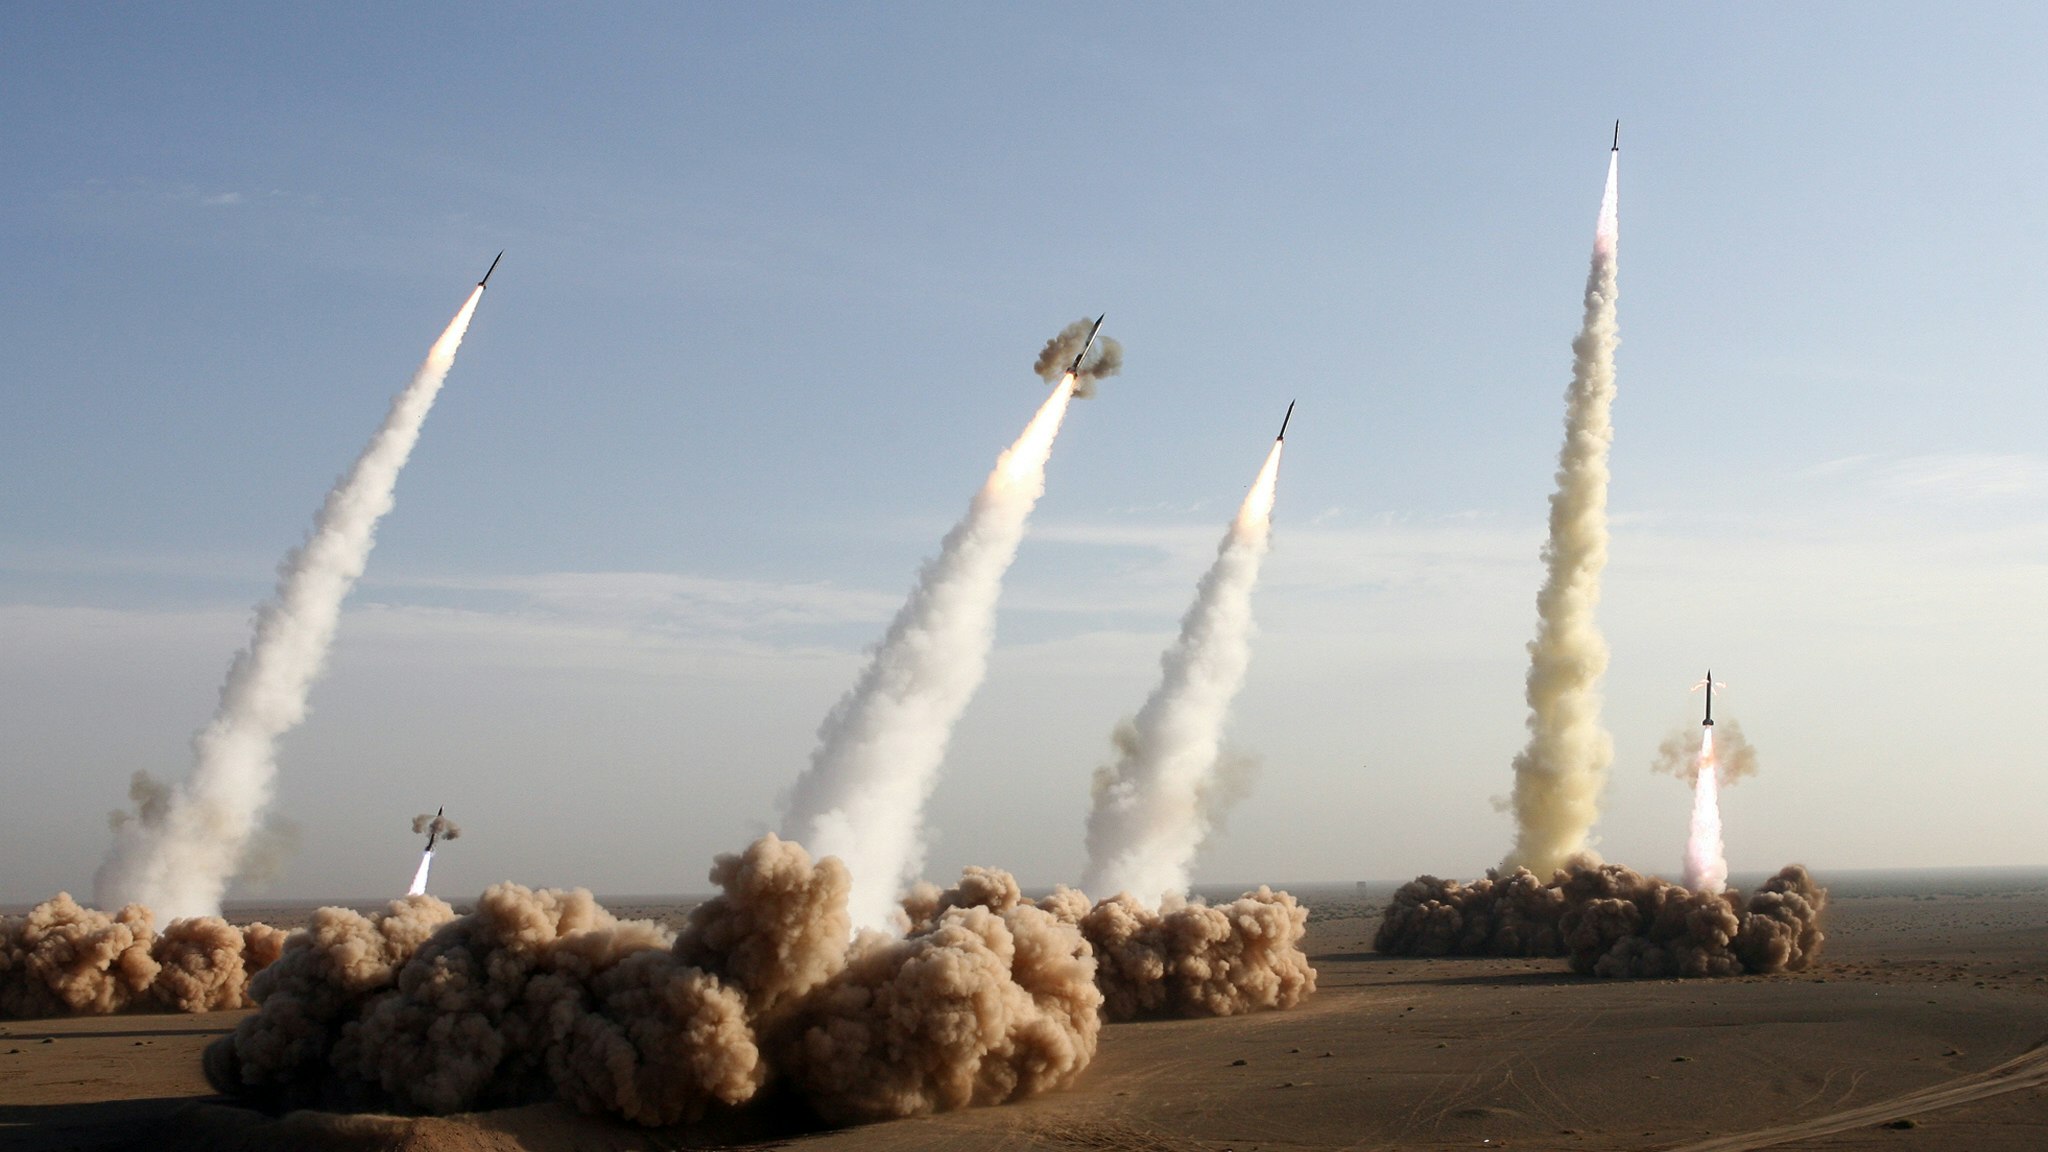 Iran's Revolutionary Guards fire test missiles during the first phase of military manoeuvres in the central desert outside the holy city of Qom, 02 November 2006. The Islamic republic fired its longer-range missile on exercise for the first time today as it began 10 days of war games amid a mounting standoff with the West over its nuclear programme.